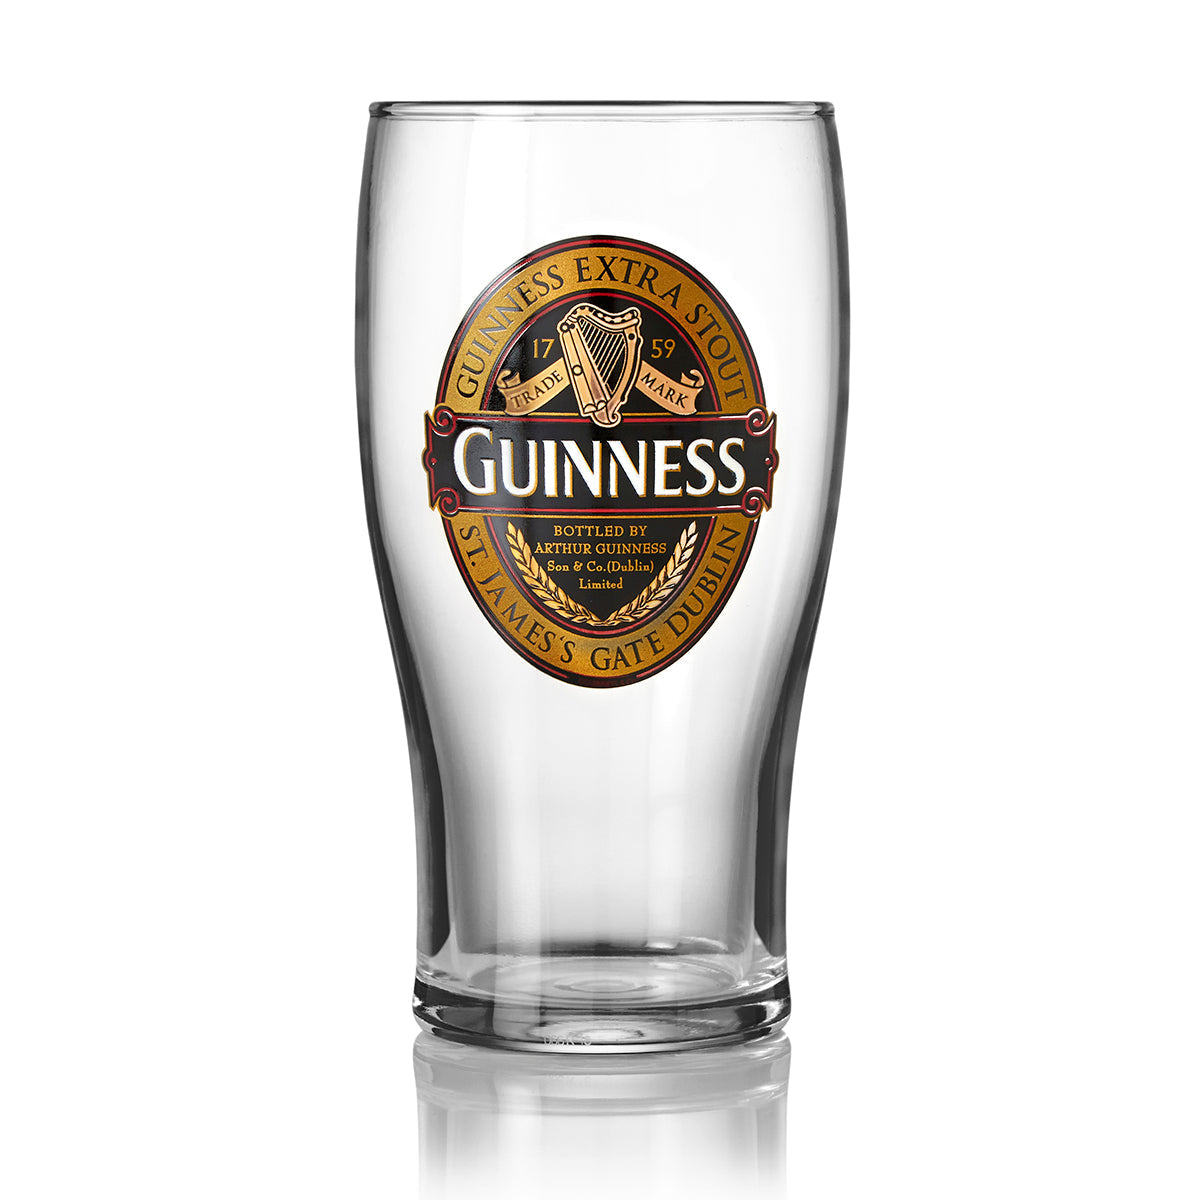 Limited edition Guinness UK branded Guinness Classic Collection Pint Glass - 24 Pack featuring the iconic Extra Stout label.